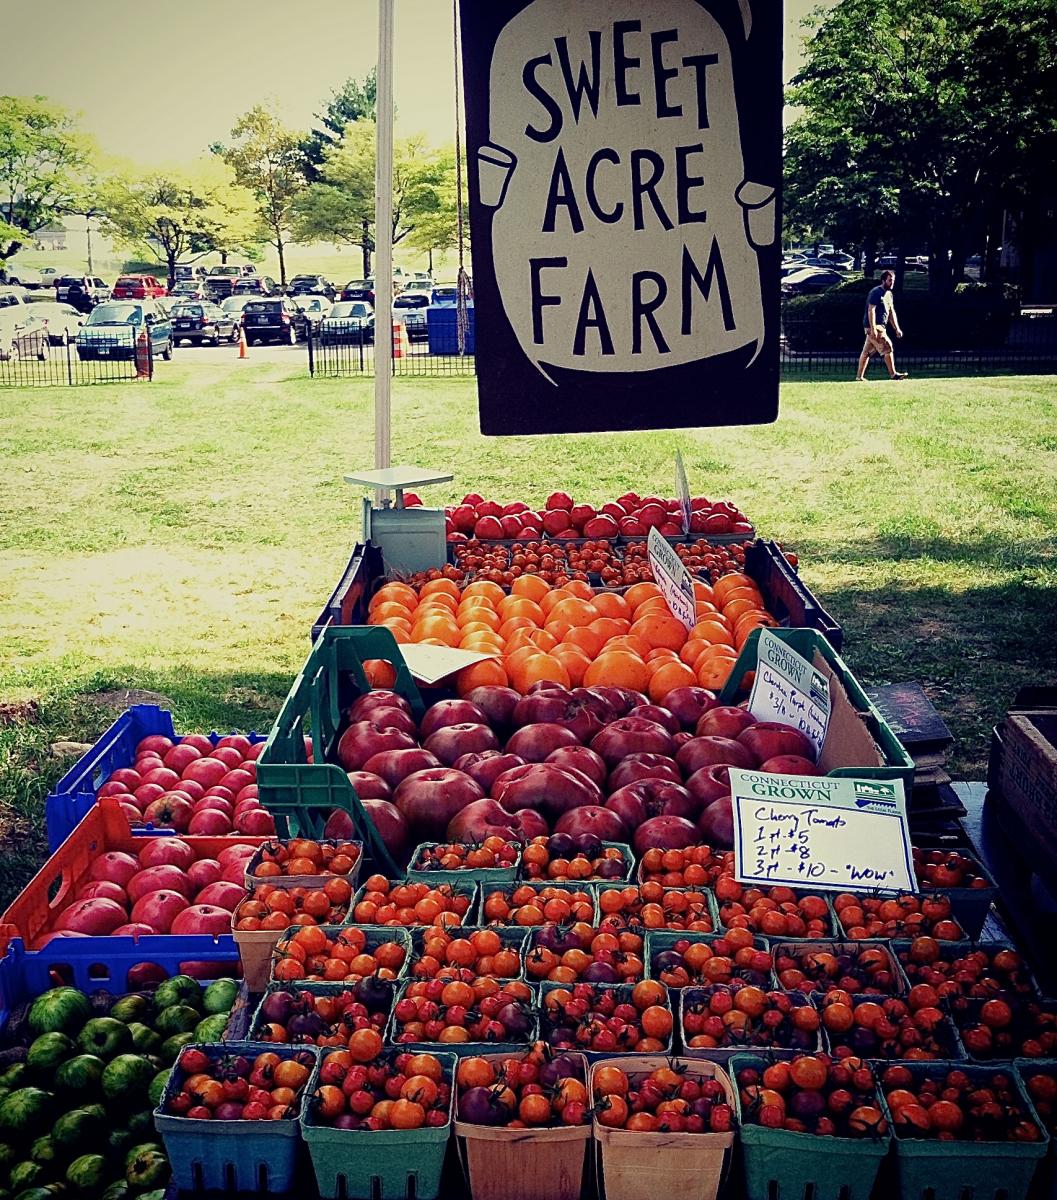 Sweet Acre Farm stand